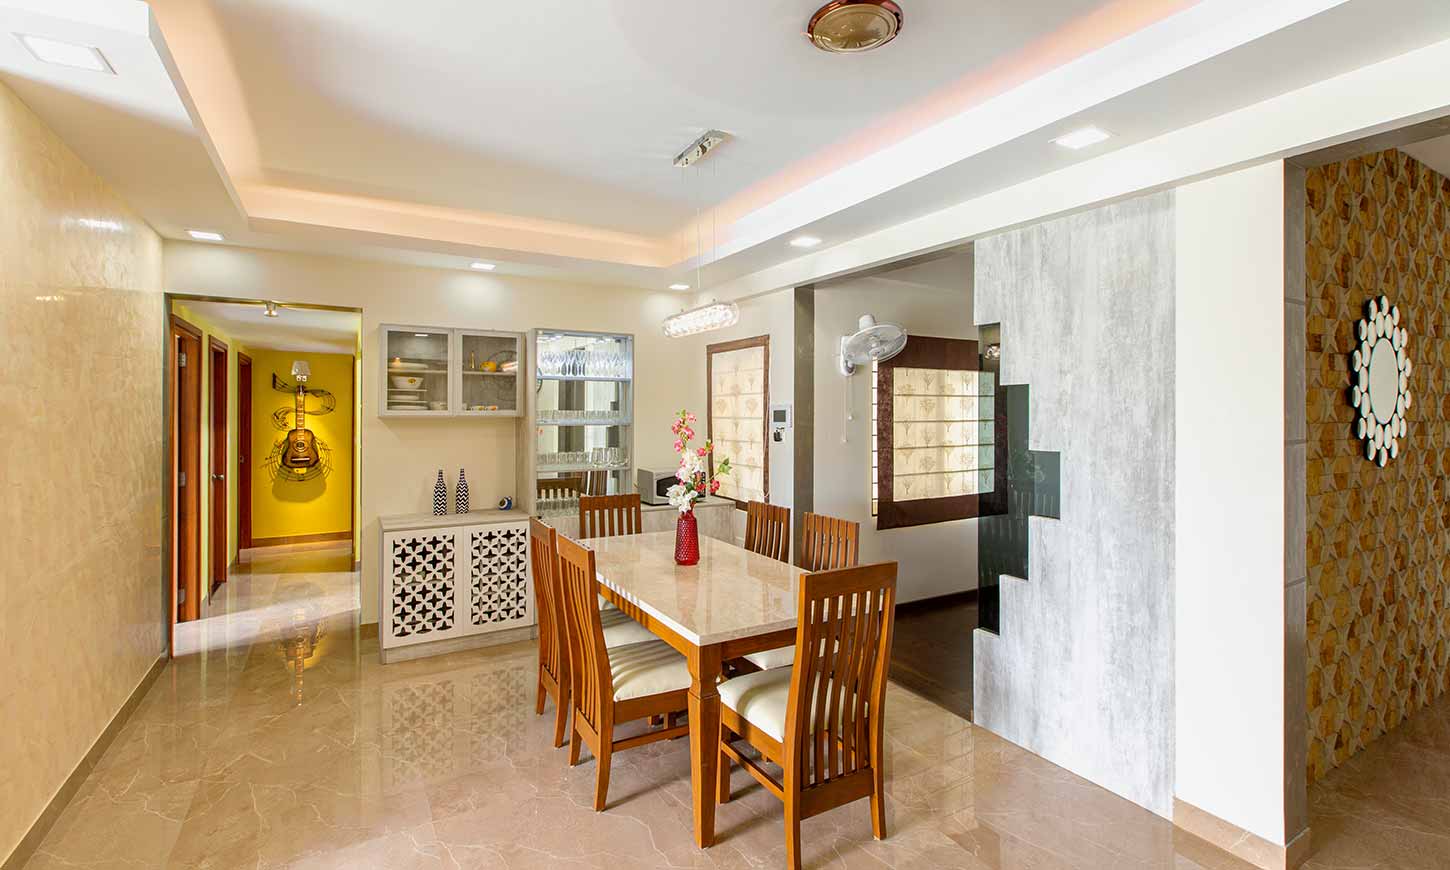 Dinng room designed by one of the top 5 interior designers in bangalore